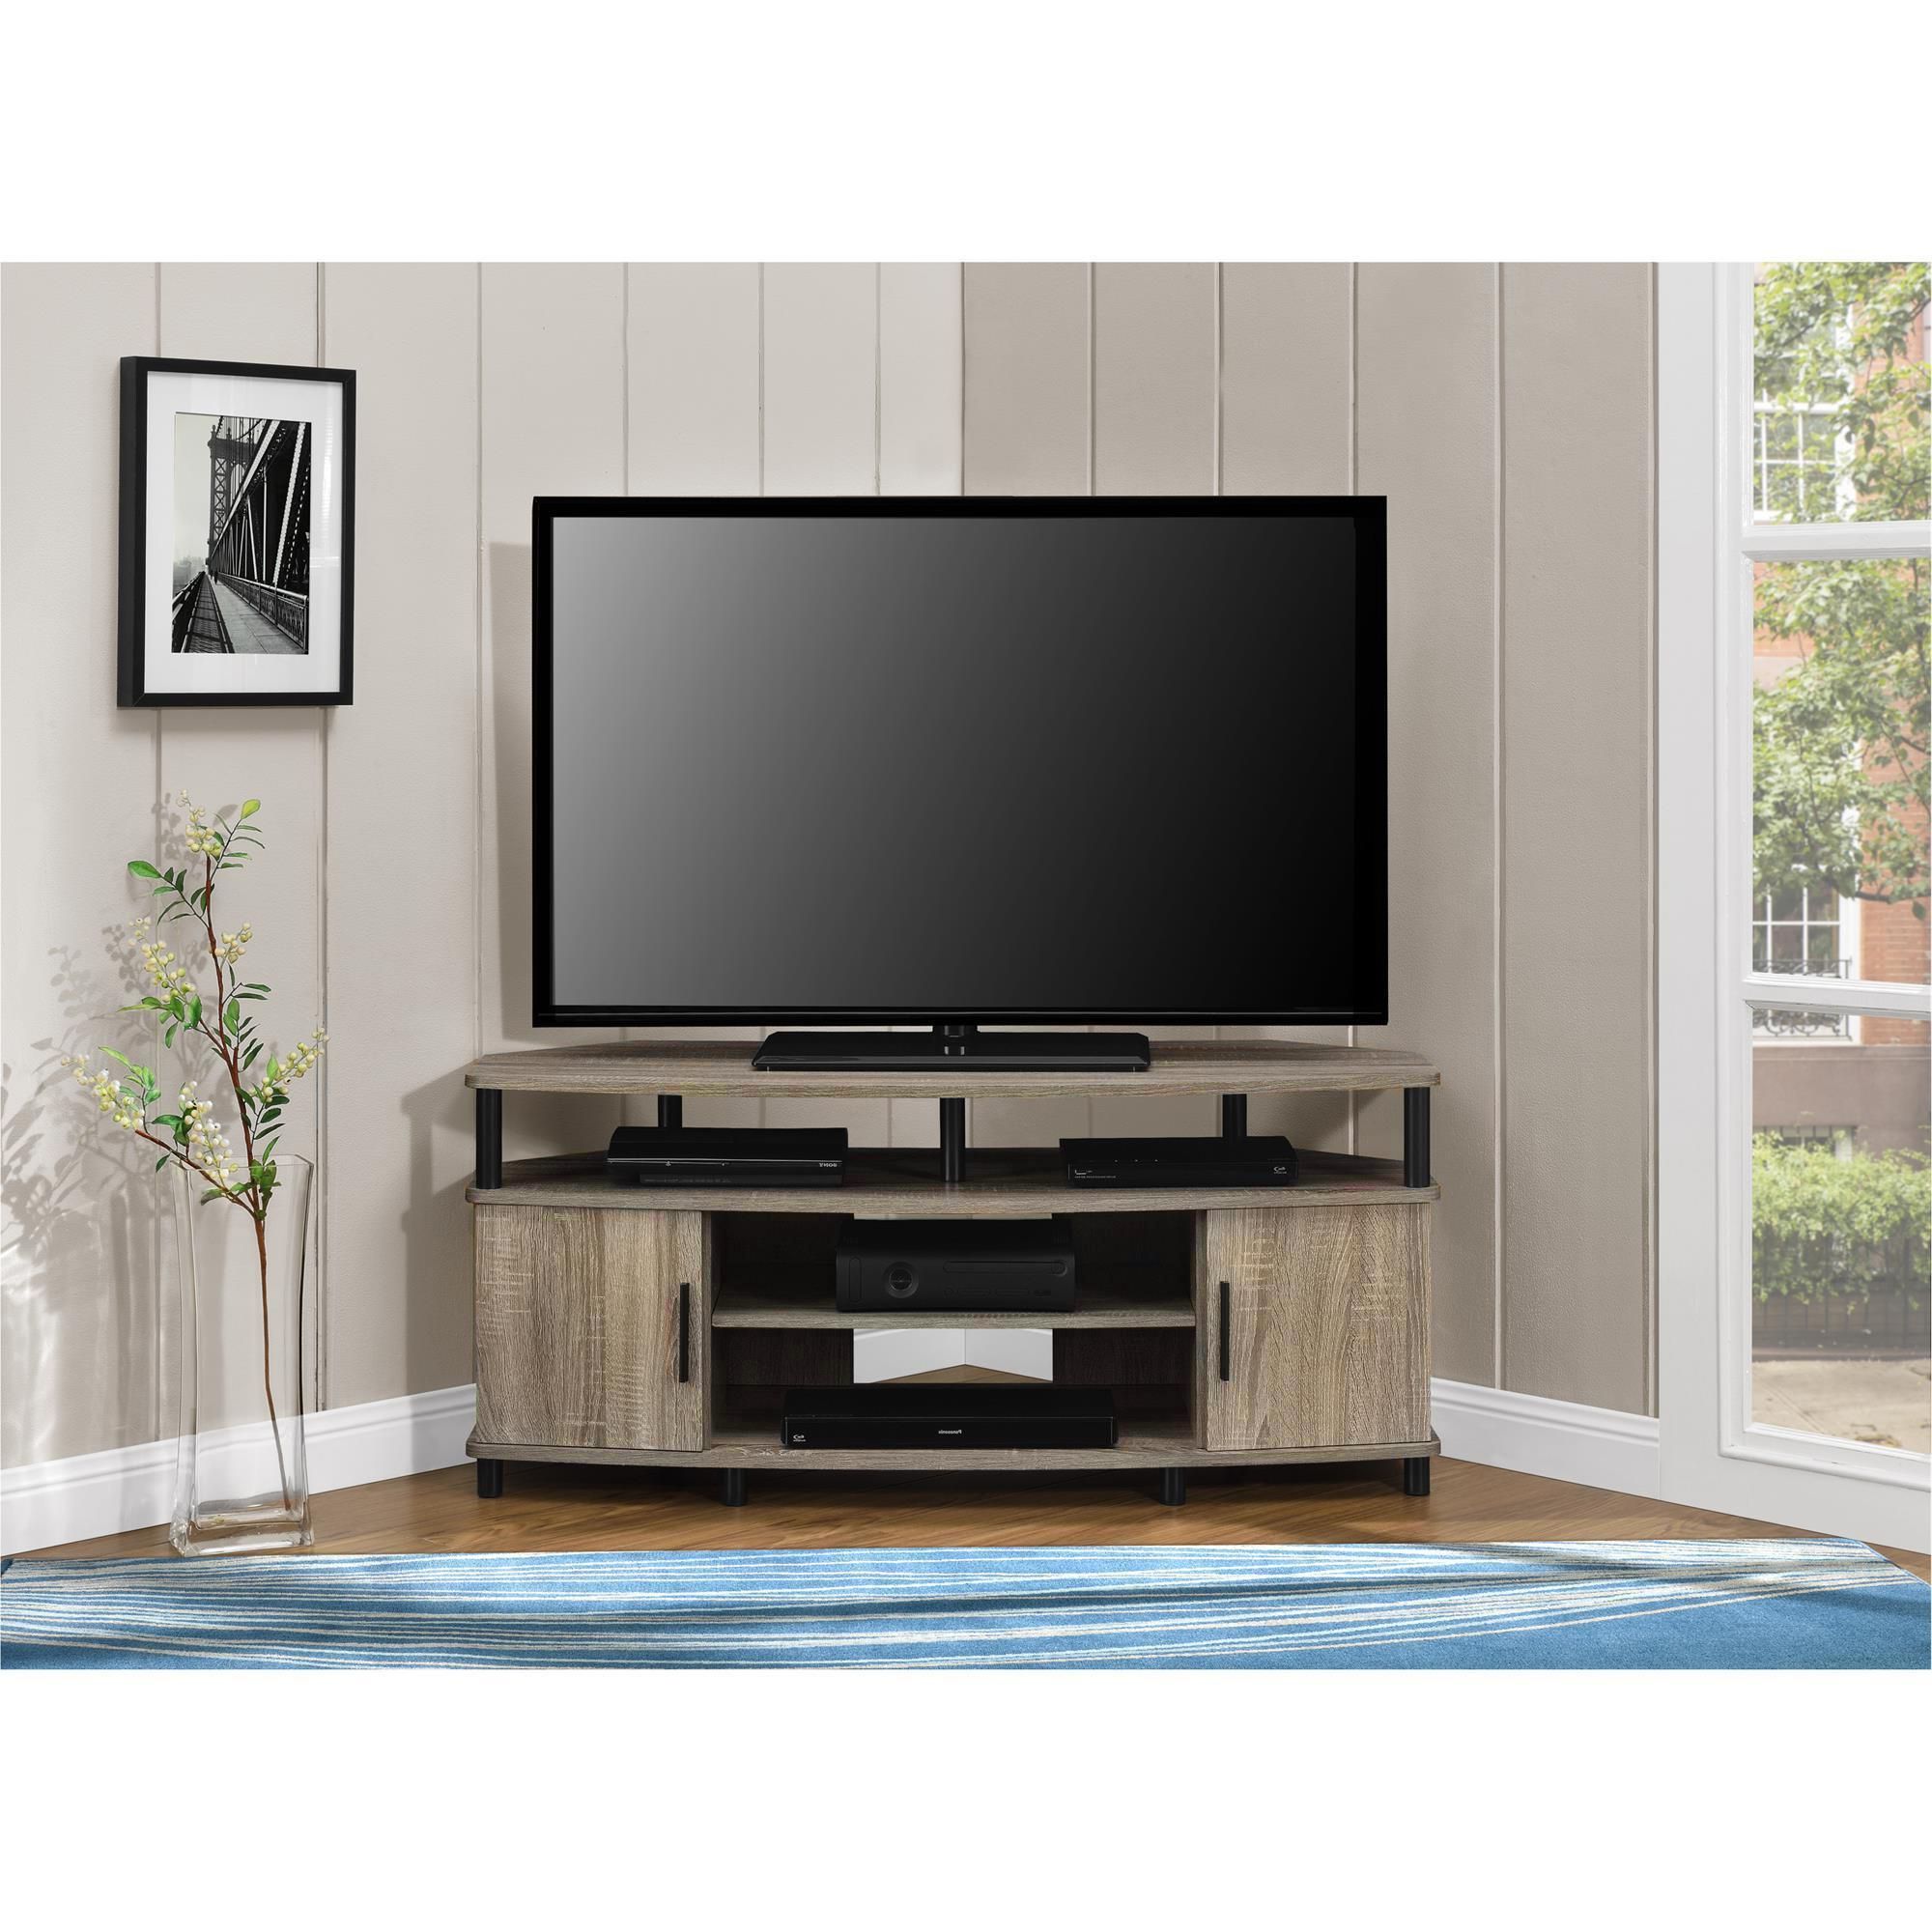 Most Recent 50 Inch Corner Tv Cabinets With Regard To Shop Ameriwood Home Carson 50 Inch Sonoma Oak Corner Tv Stand – Free (View 5 of 20)